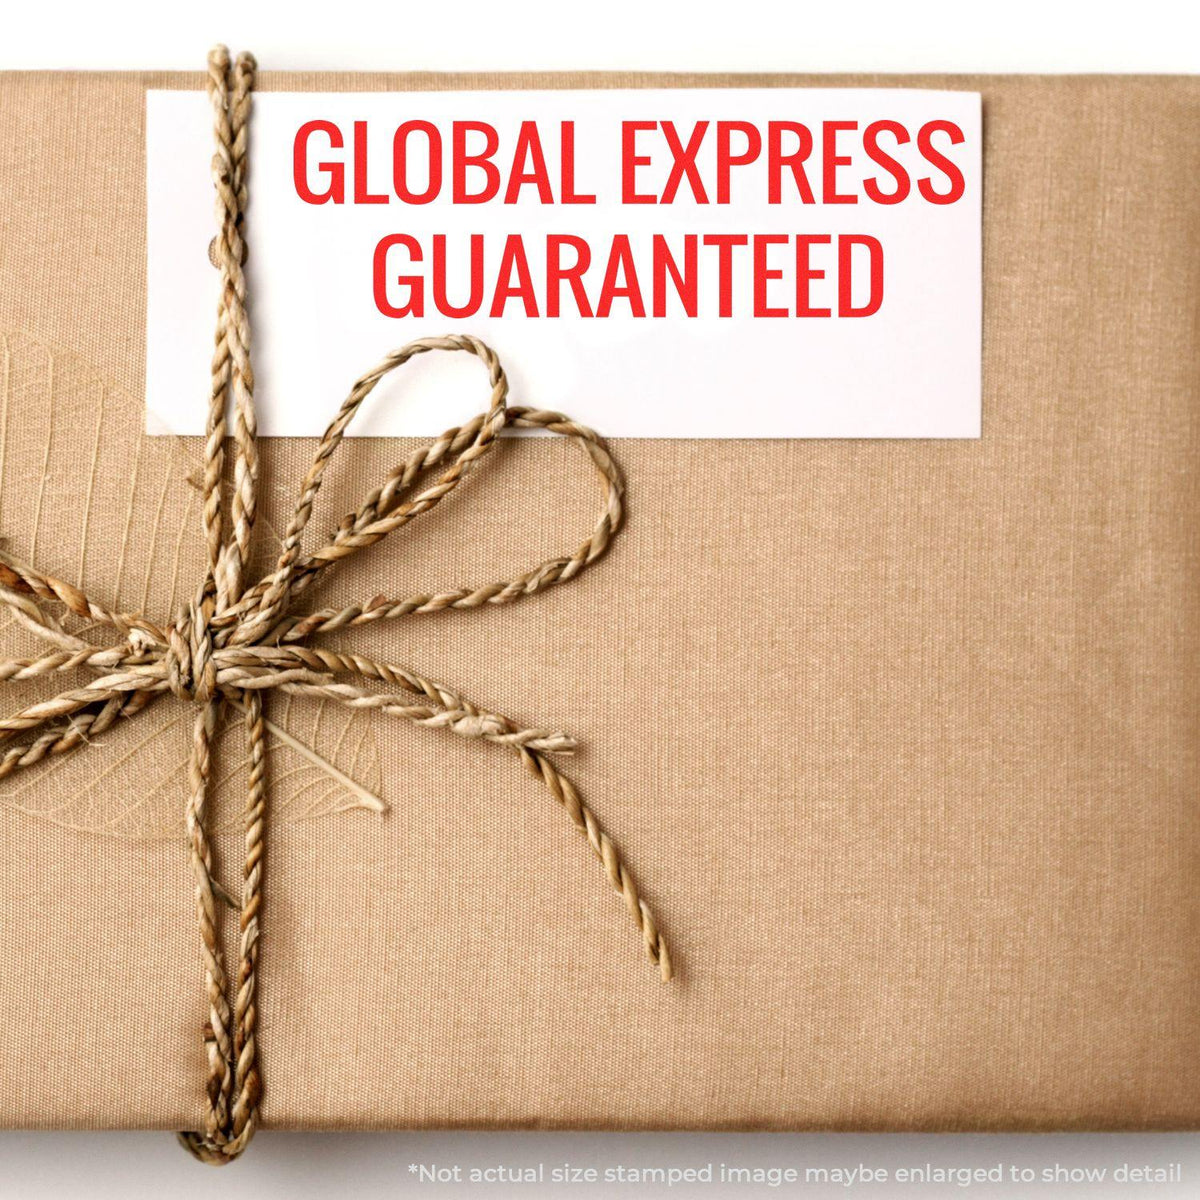 In Use Global Express Guaranteed Rubber Stamp Image